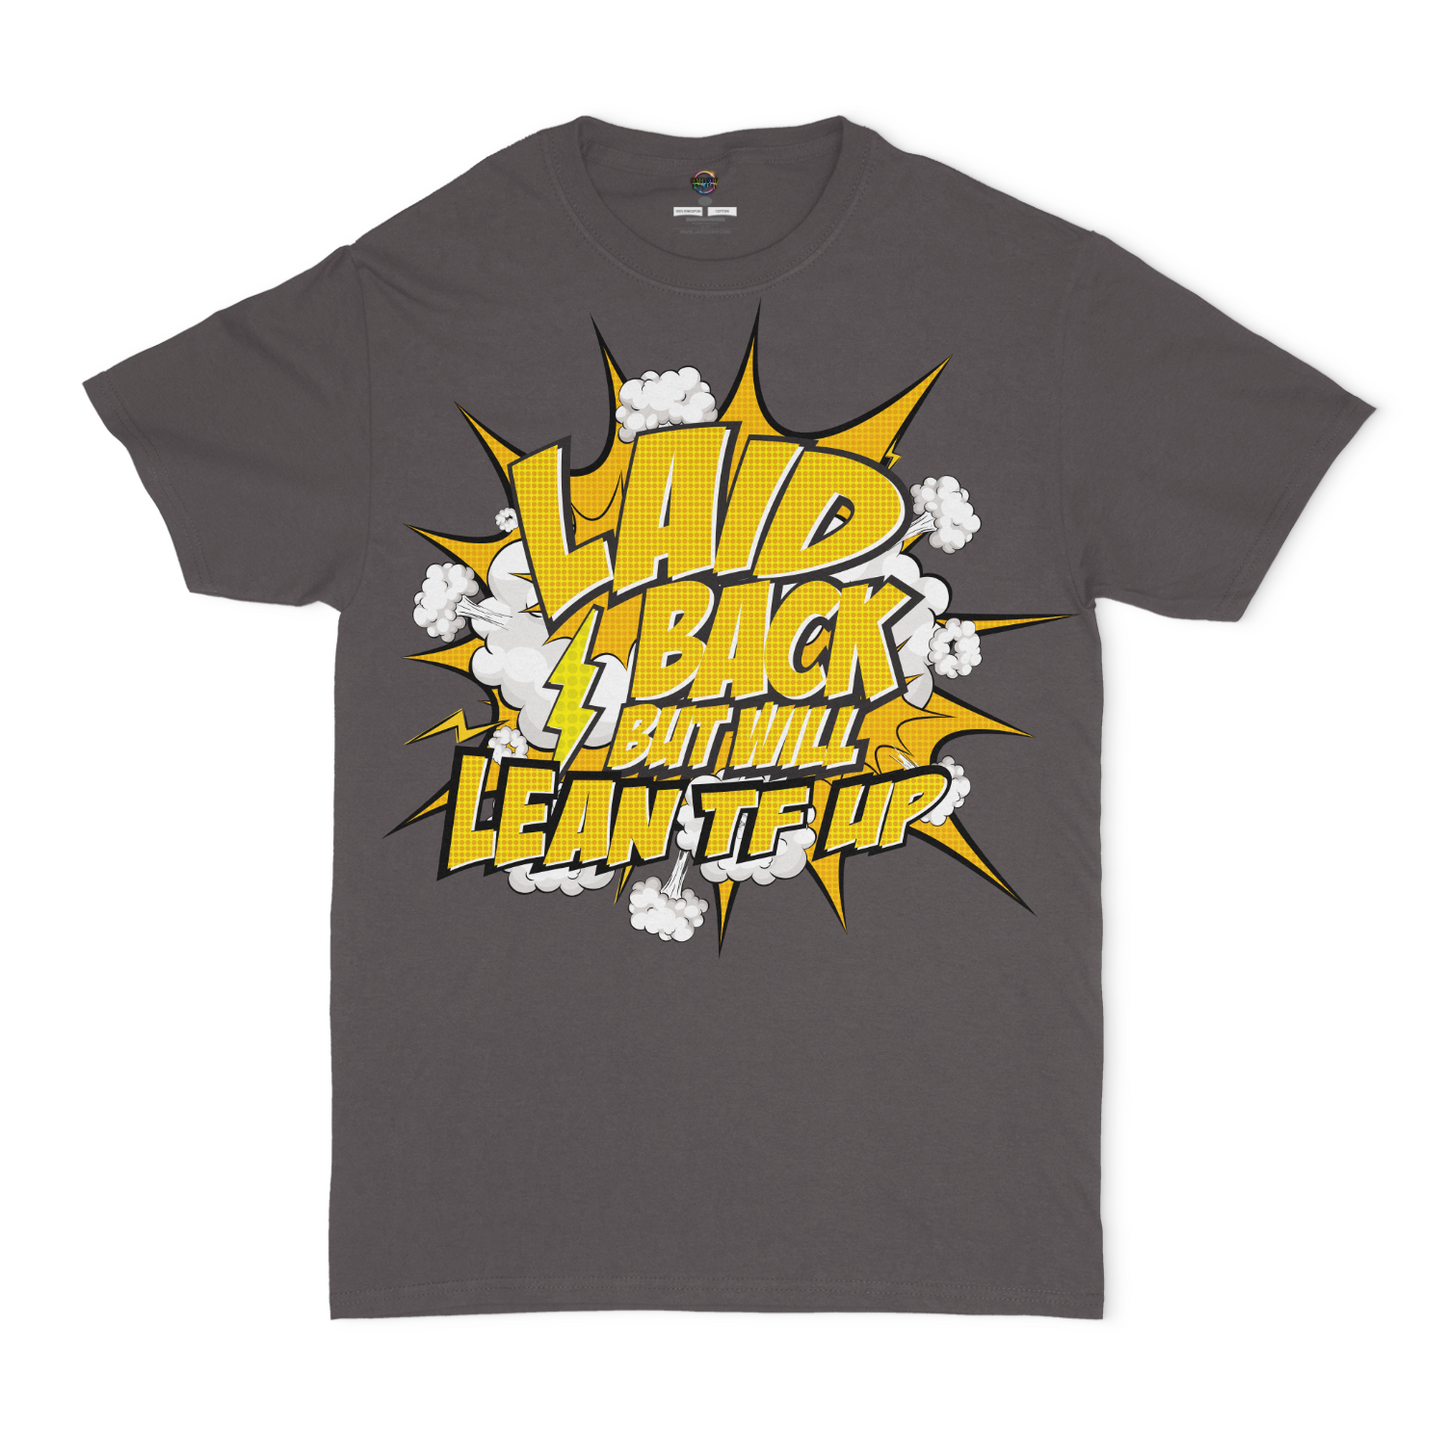 Laid Back, But Will Lean TF Up Graphic Unisex T-shirt